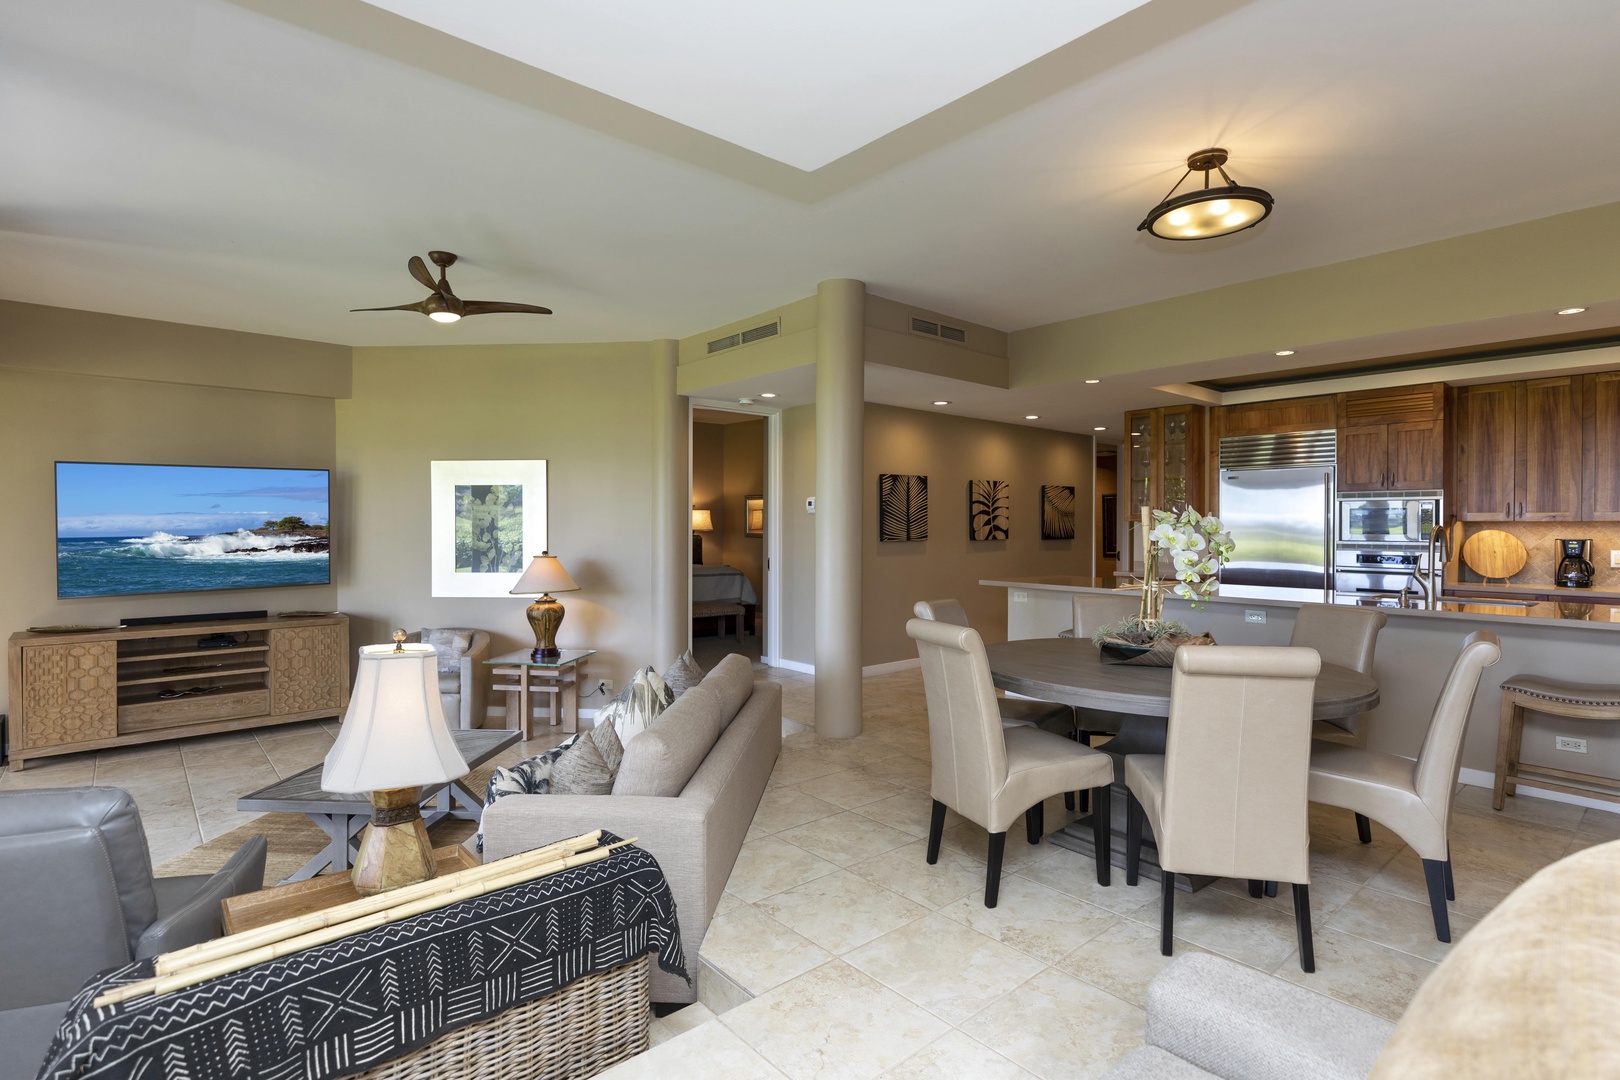 Kamuela Vacation Rentals, Mauna Lani Point E105 - Plenty of seating and areas to enjoy in the great room.